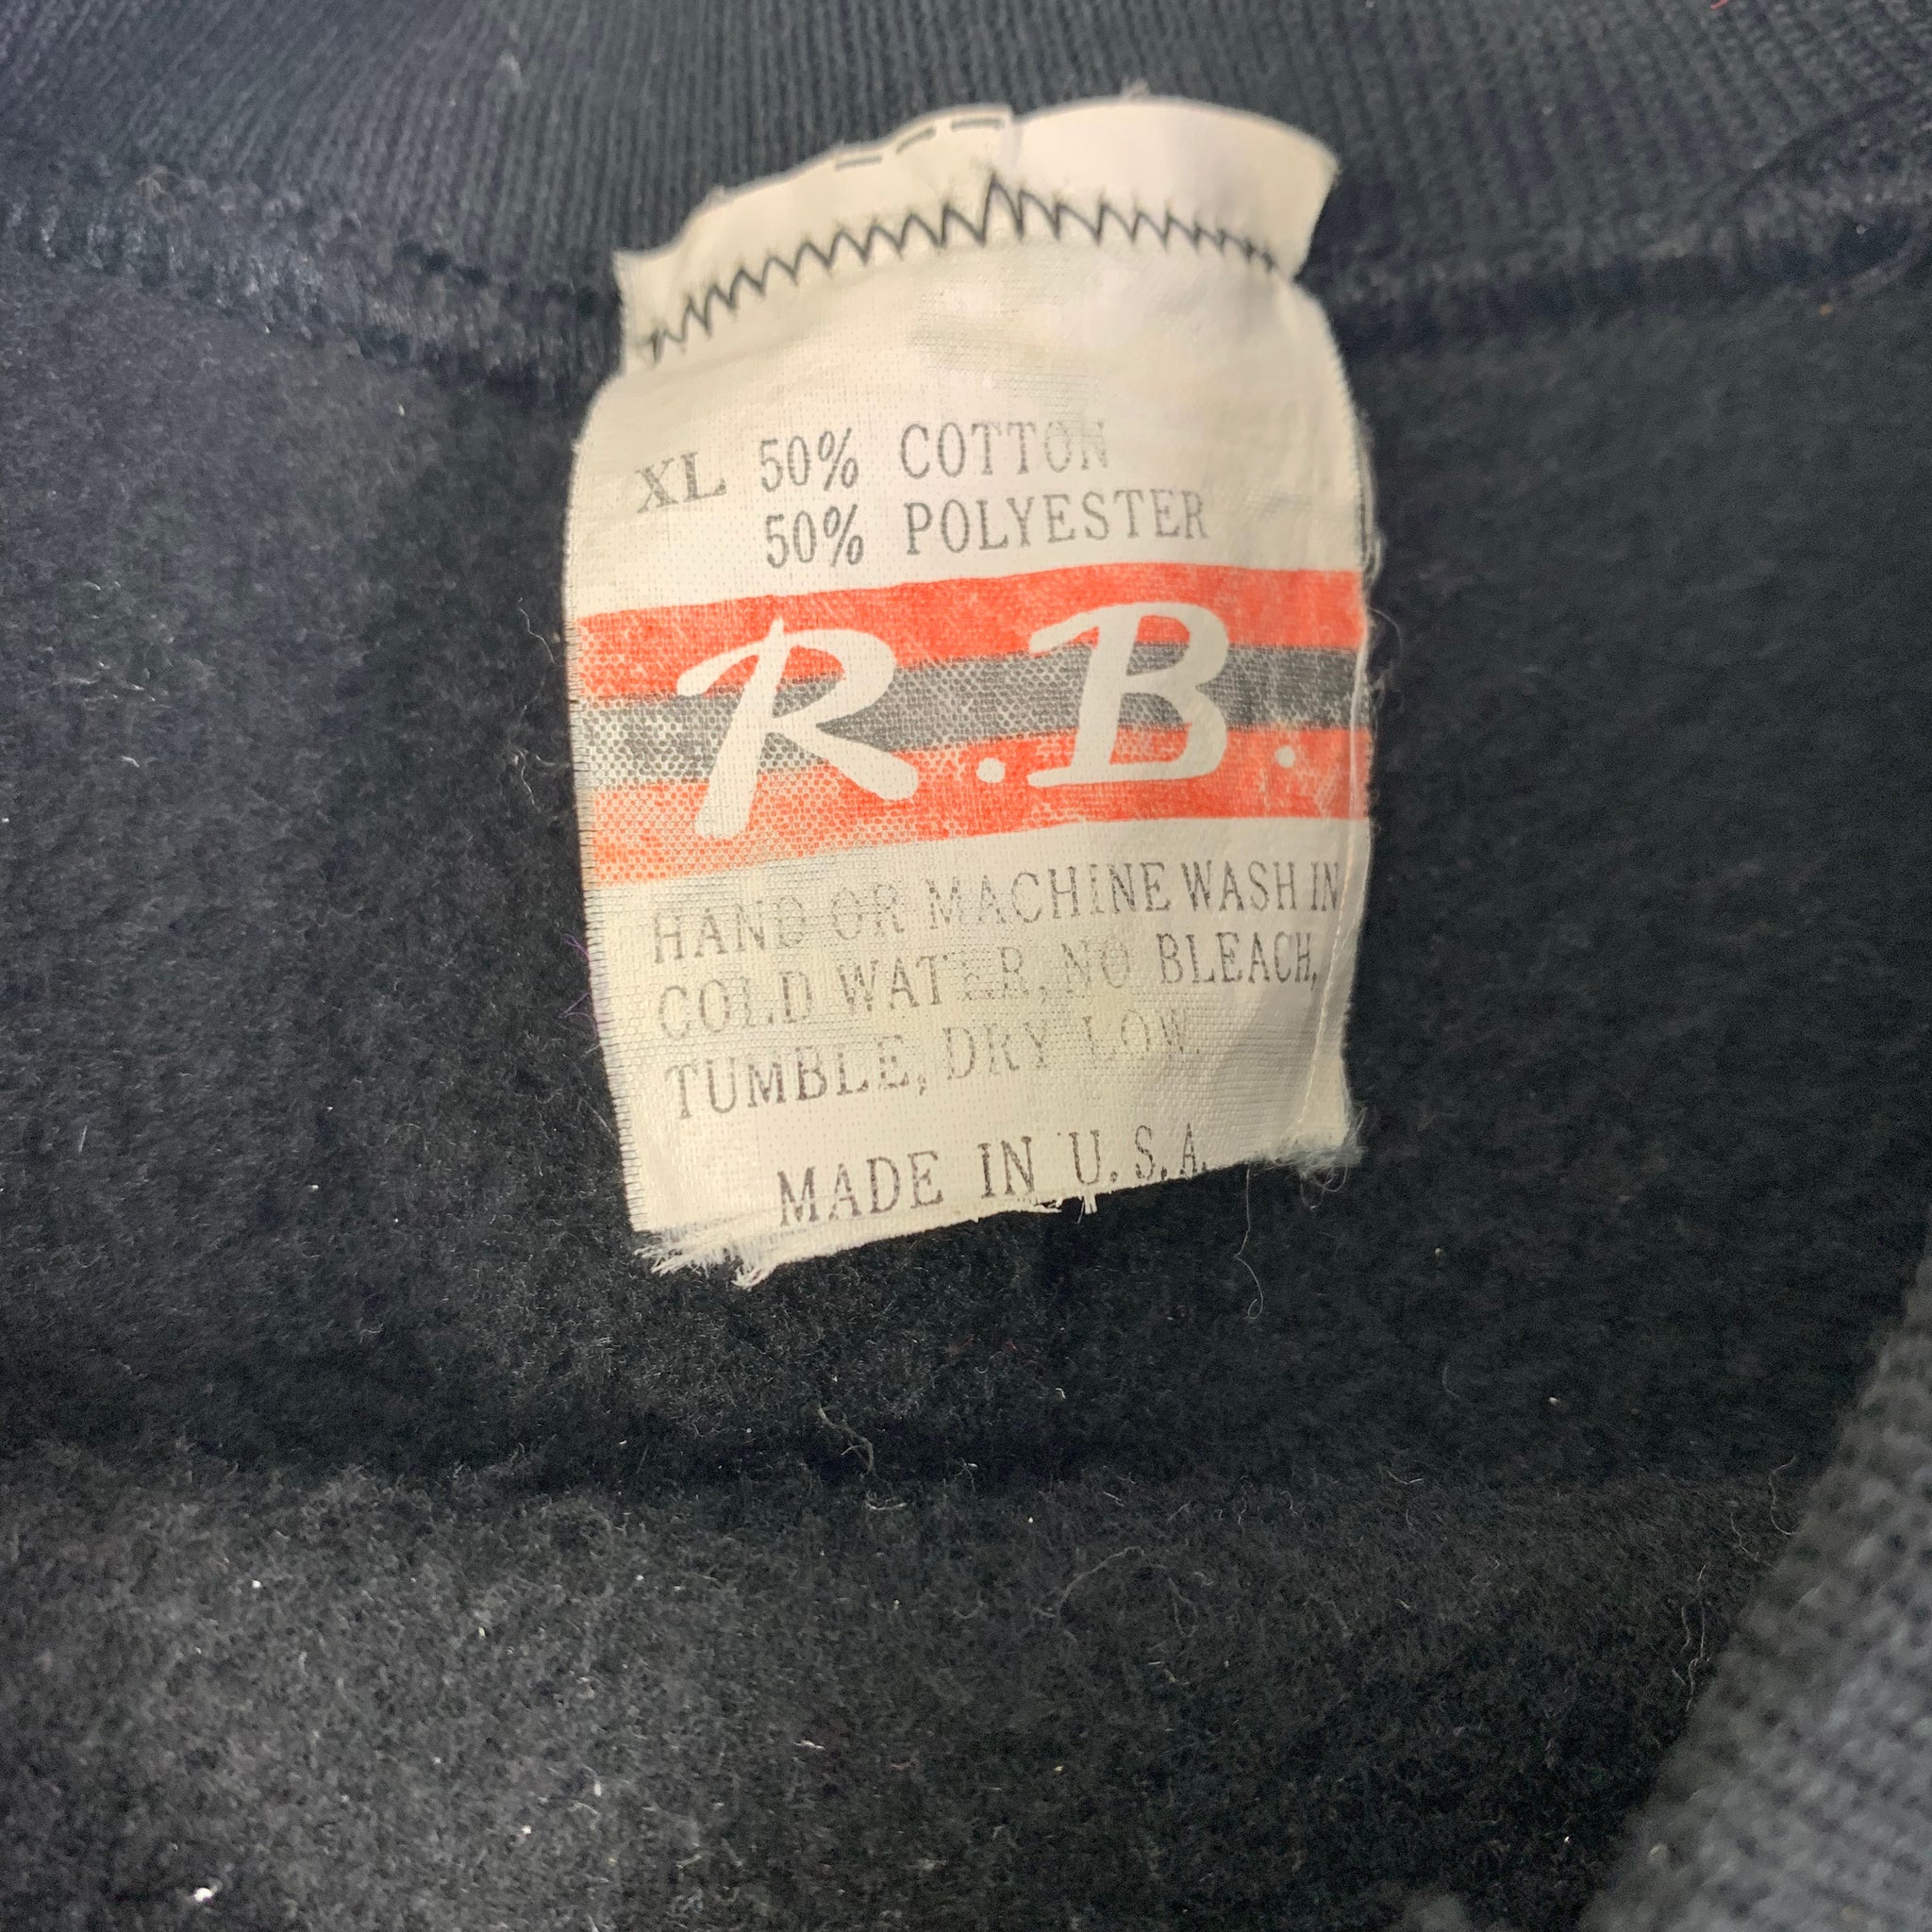 coco chanel jeans 38